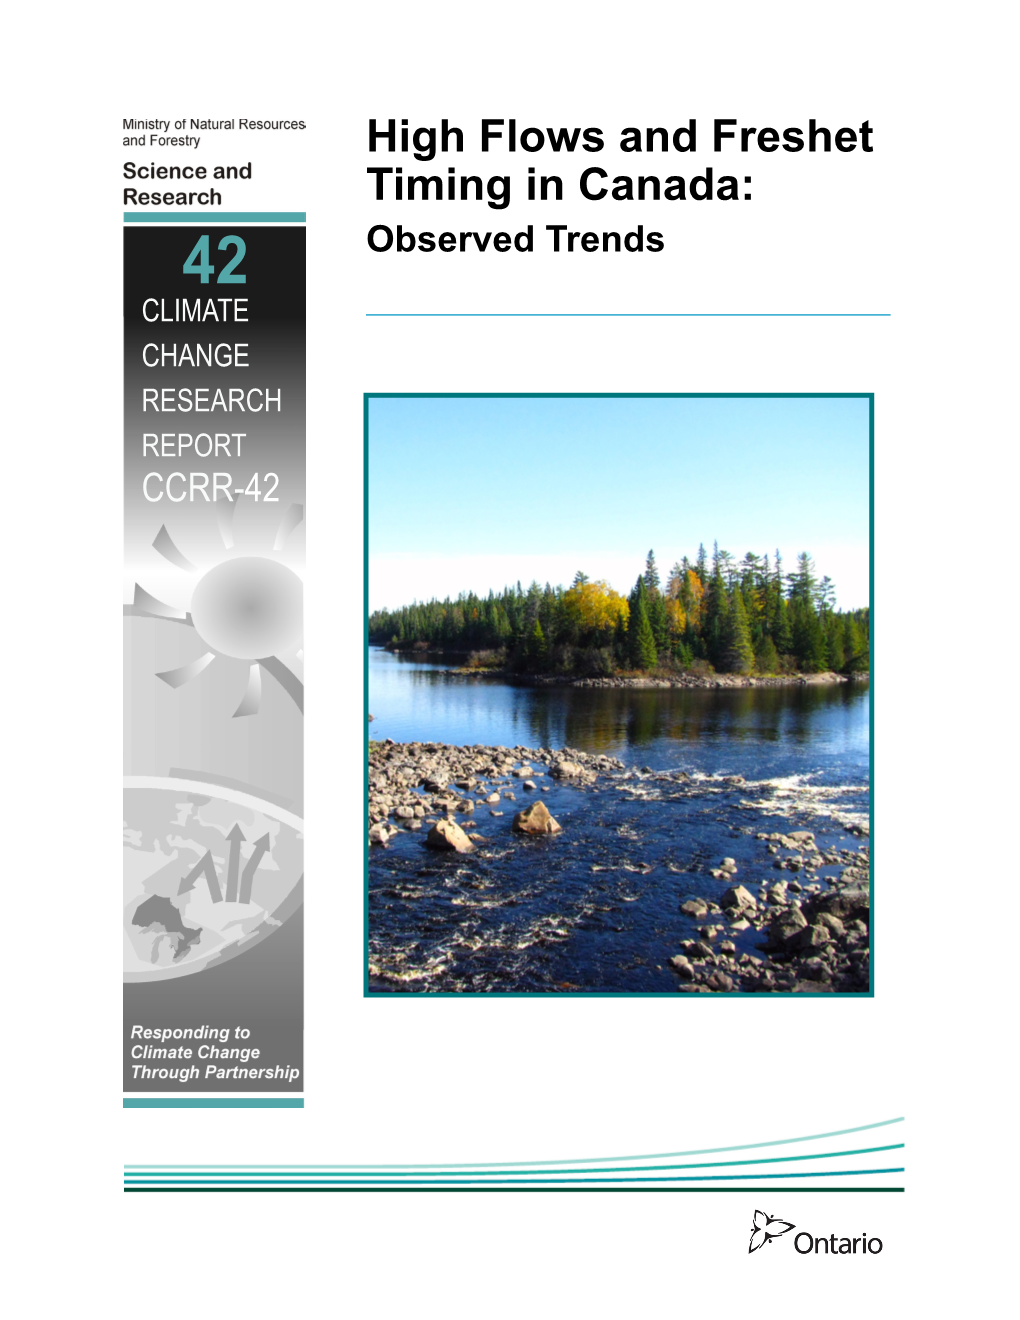 High Flows and Freshet Timing in Canada: Observed Trends CCRR 42